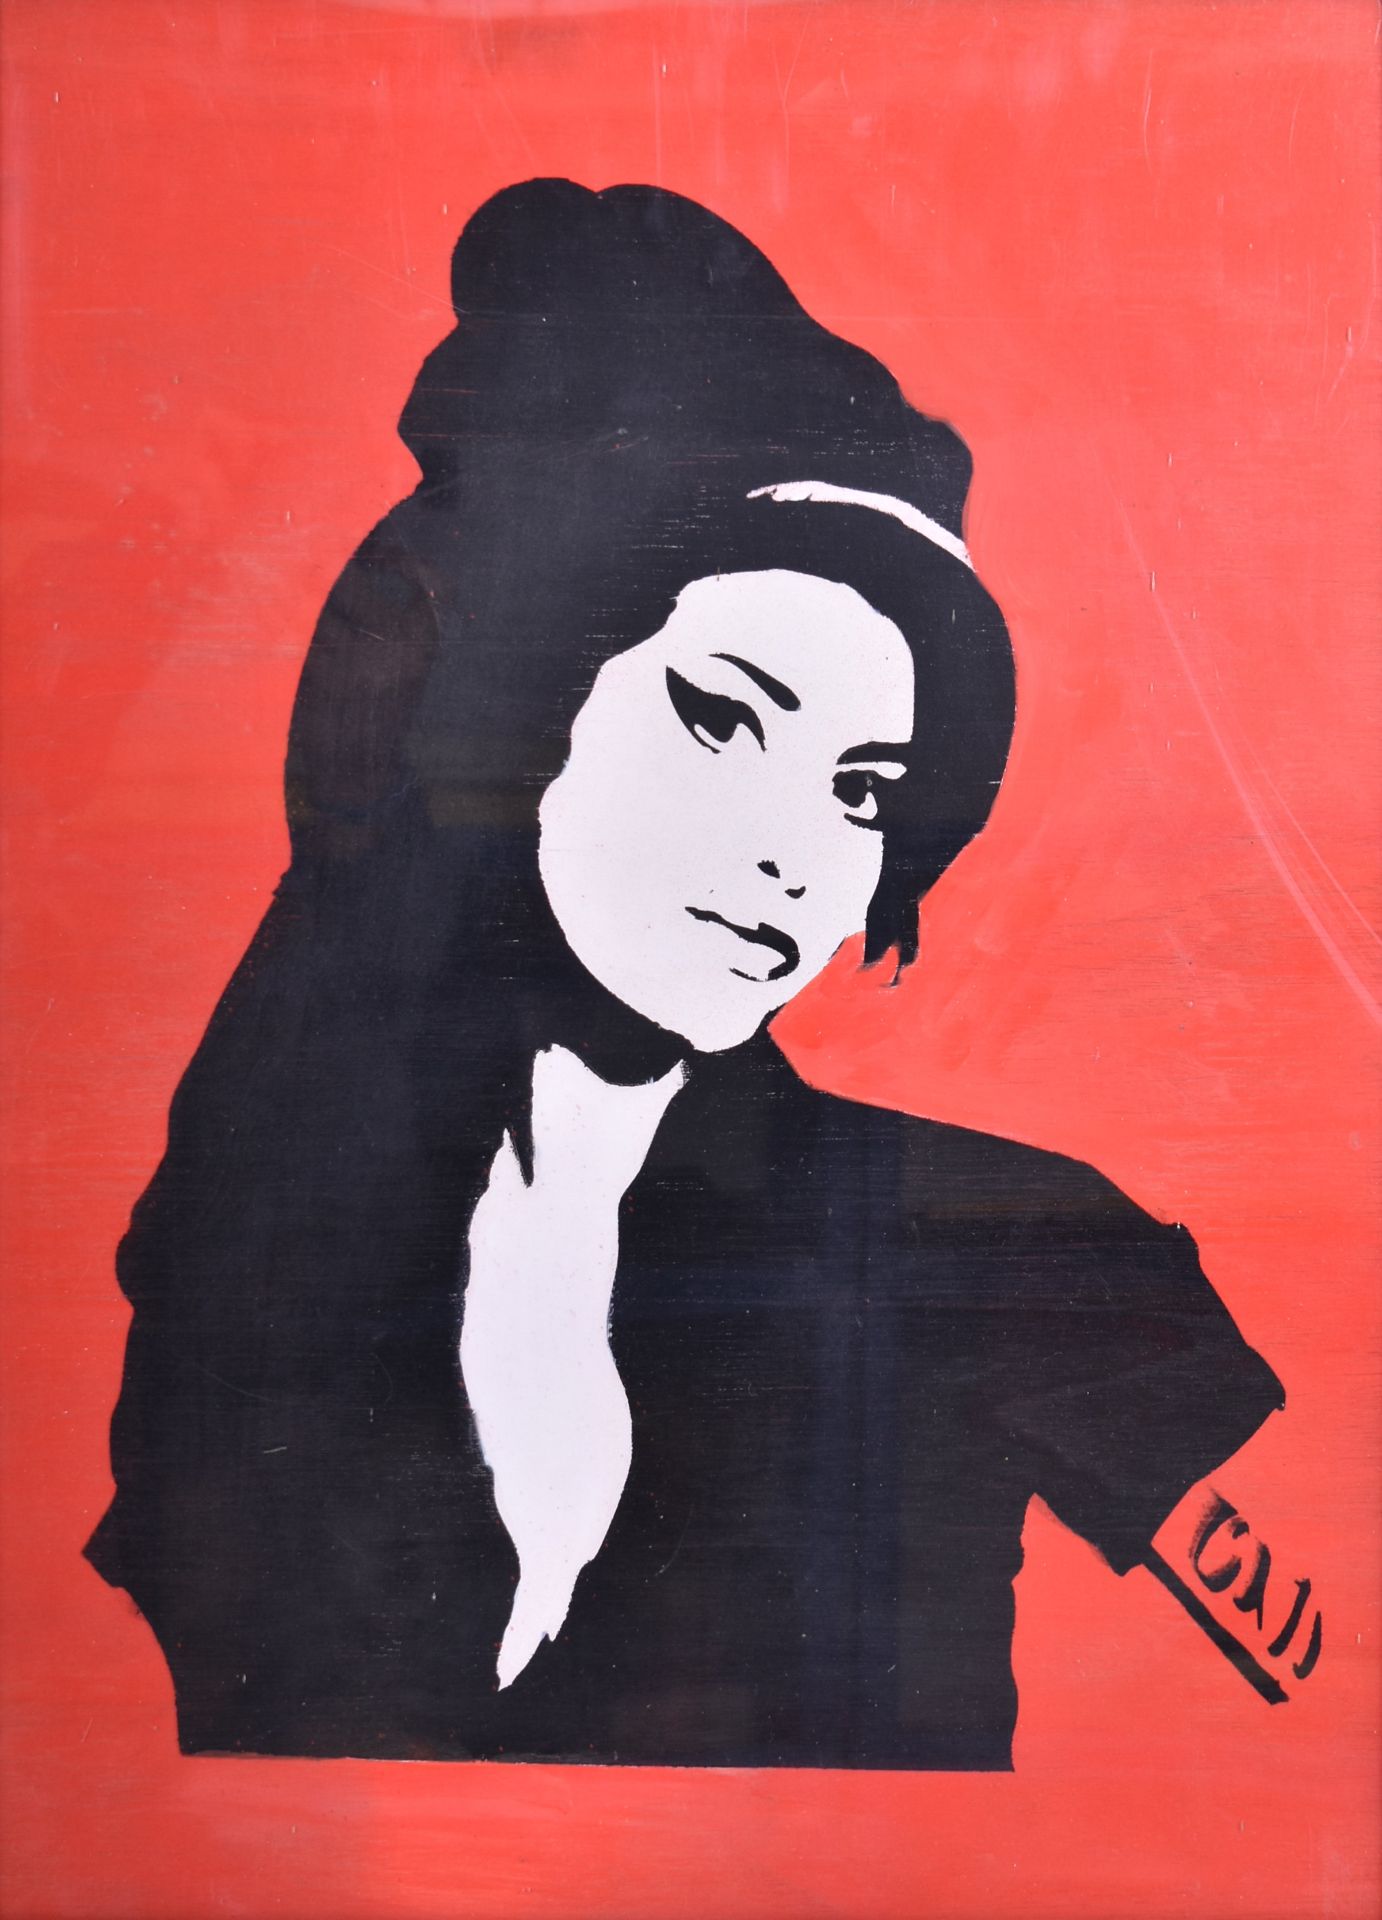 DAVID HUDSON - A COLLECTION OF 4 STENCIL SPRAY PAINTINGS - Image 11 of 13